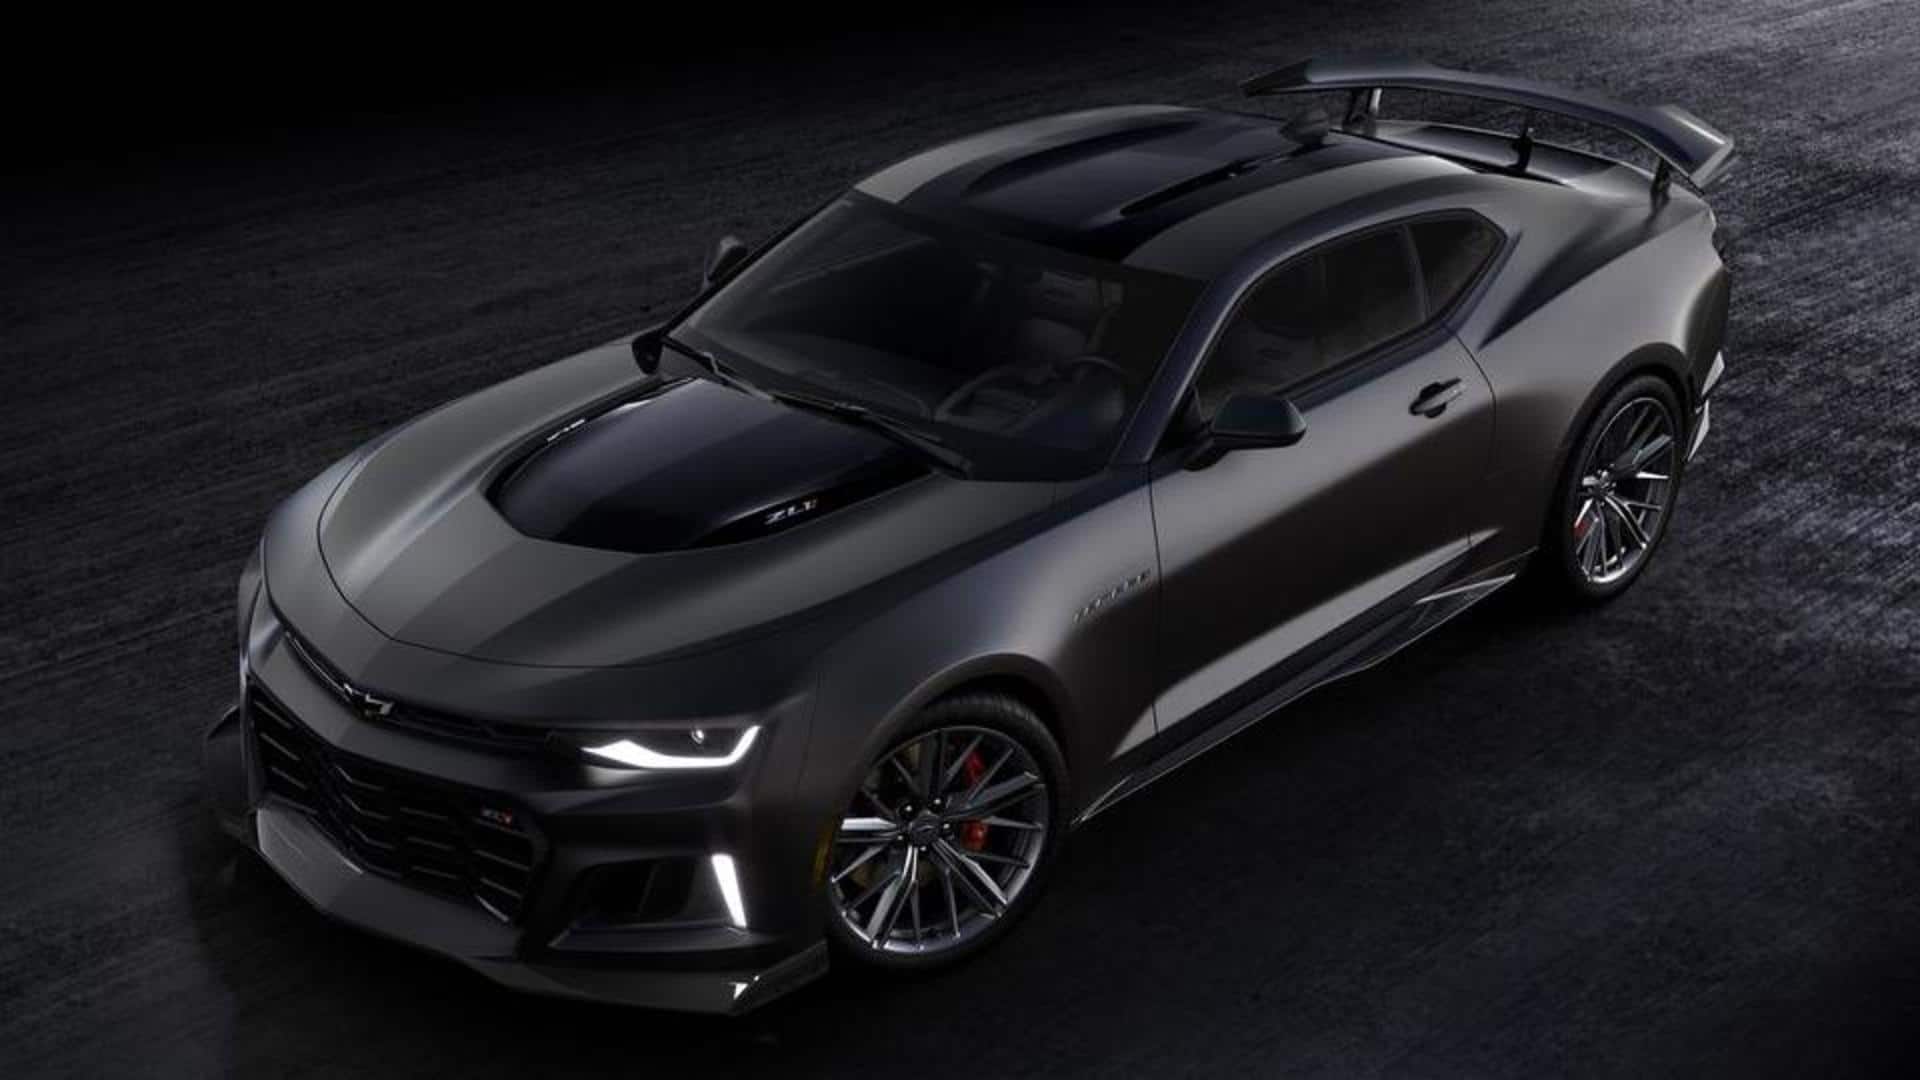 Chevrolet Camaro Collector's Edition goes official: Check top features